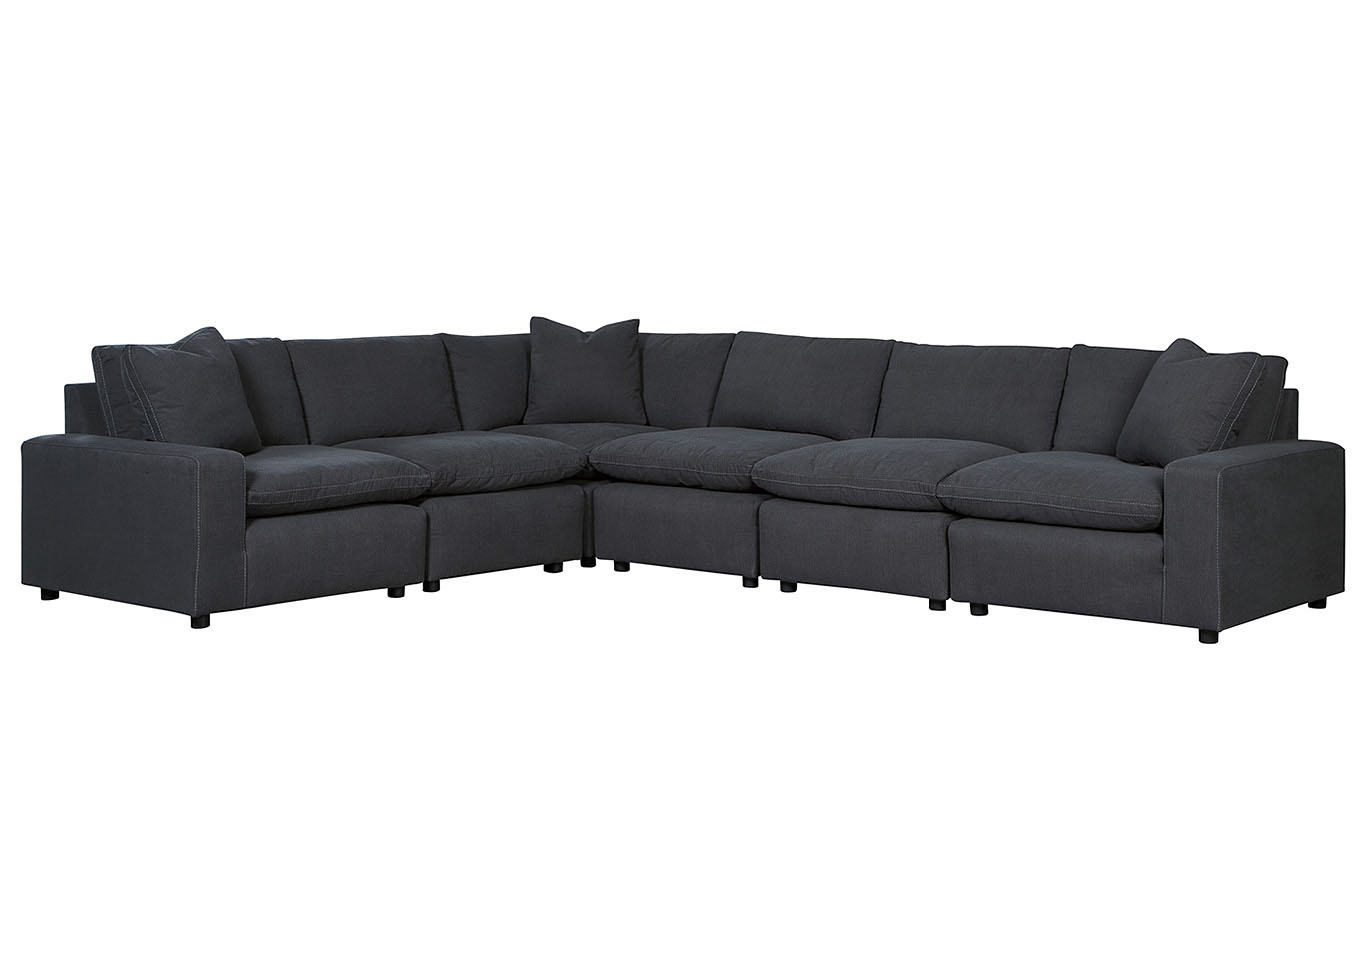 Savesto 6-Piece Sectional,Signature Design By Ashley